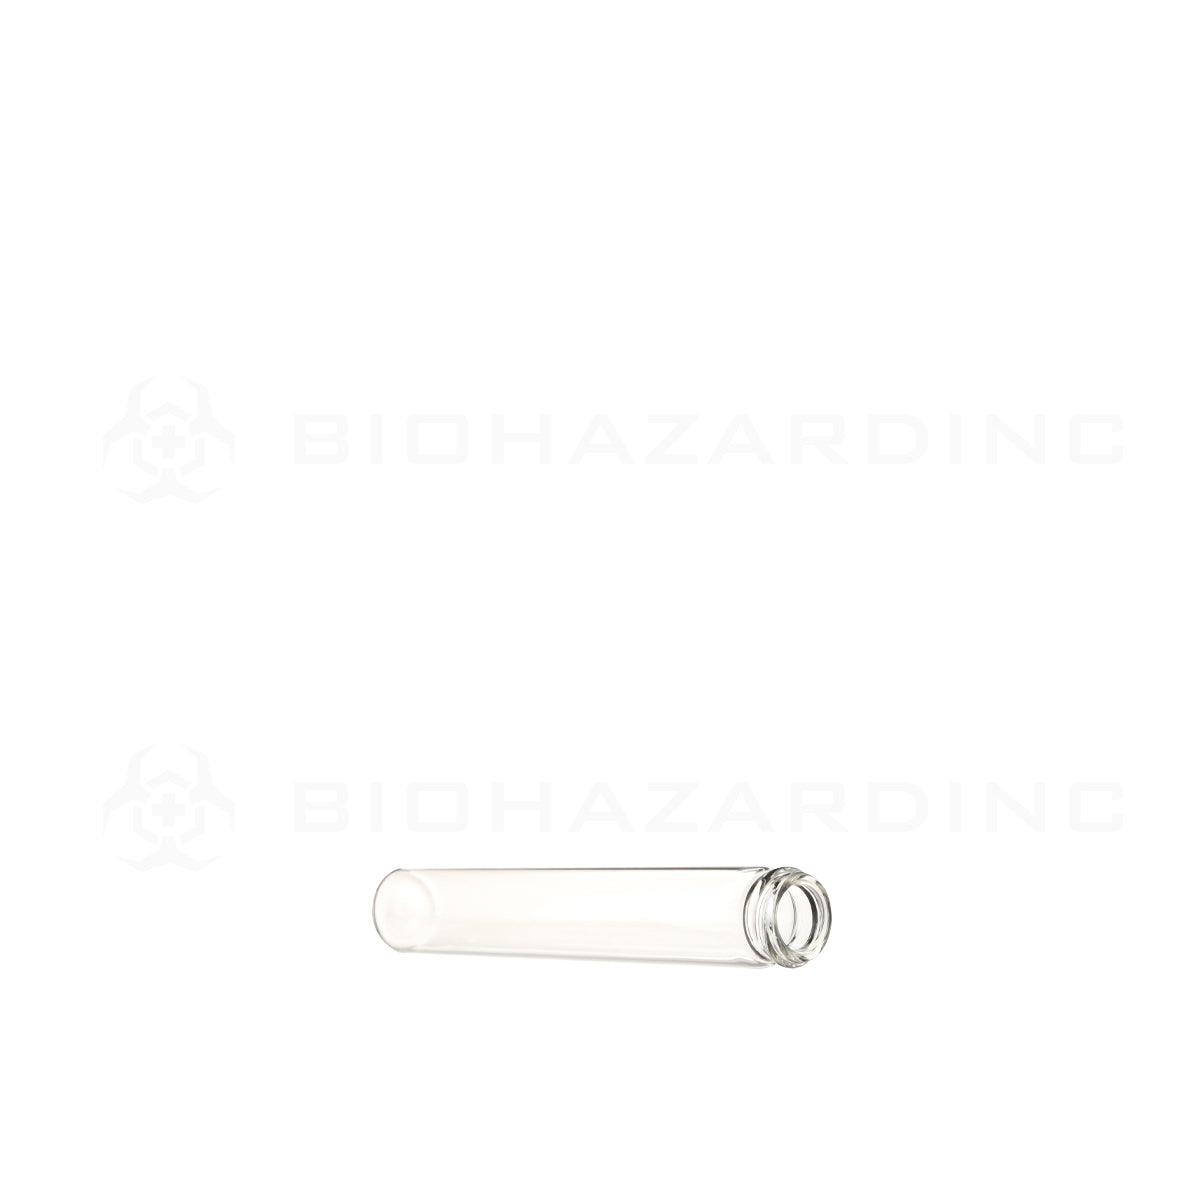 Glass Vial | Clear Glass Pre-Roll Tube | 20mm - 125mm - 240 Count Glass Vial Biohazard Inc   